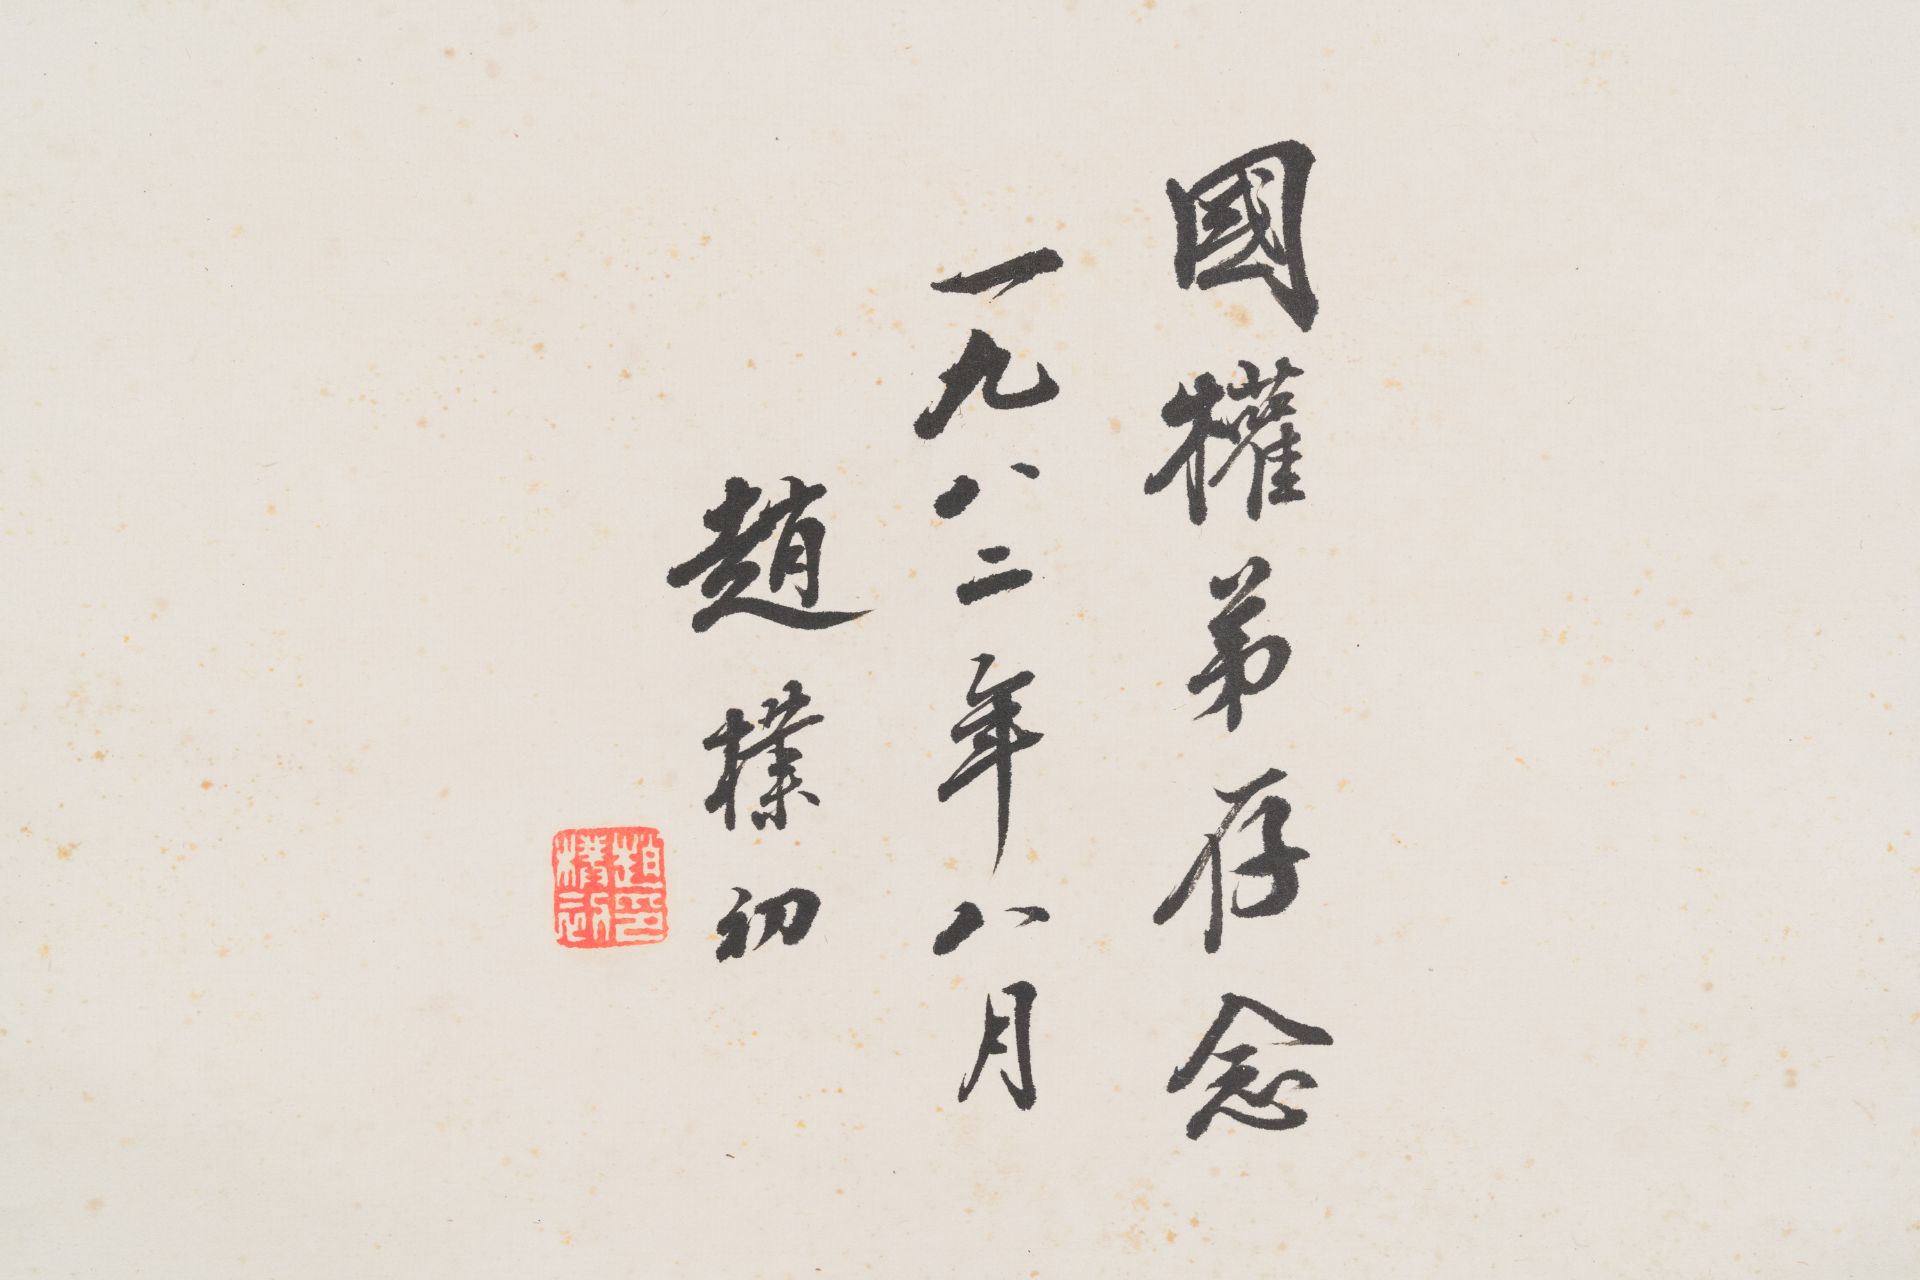 Zhao Puchu 趙樸初 (1907-2000): 'Calligraphy', ink on paper, dated 1982 - Image 4 of 4